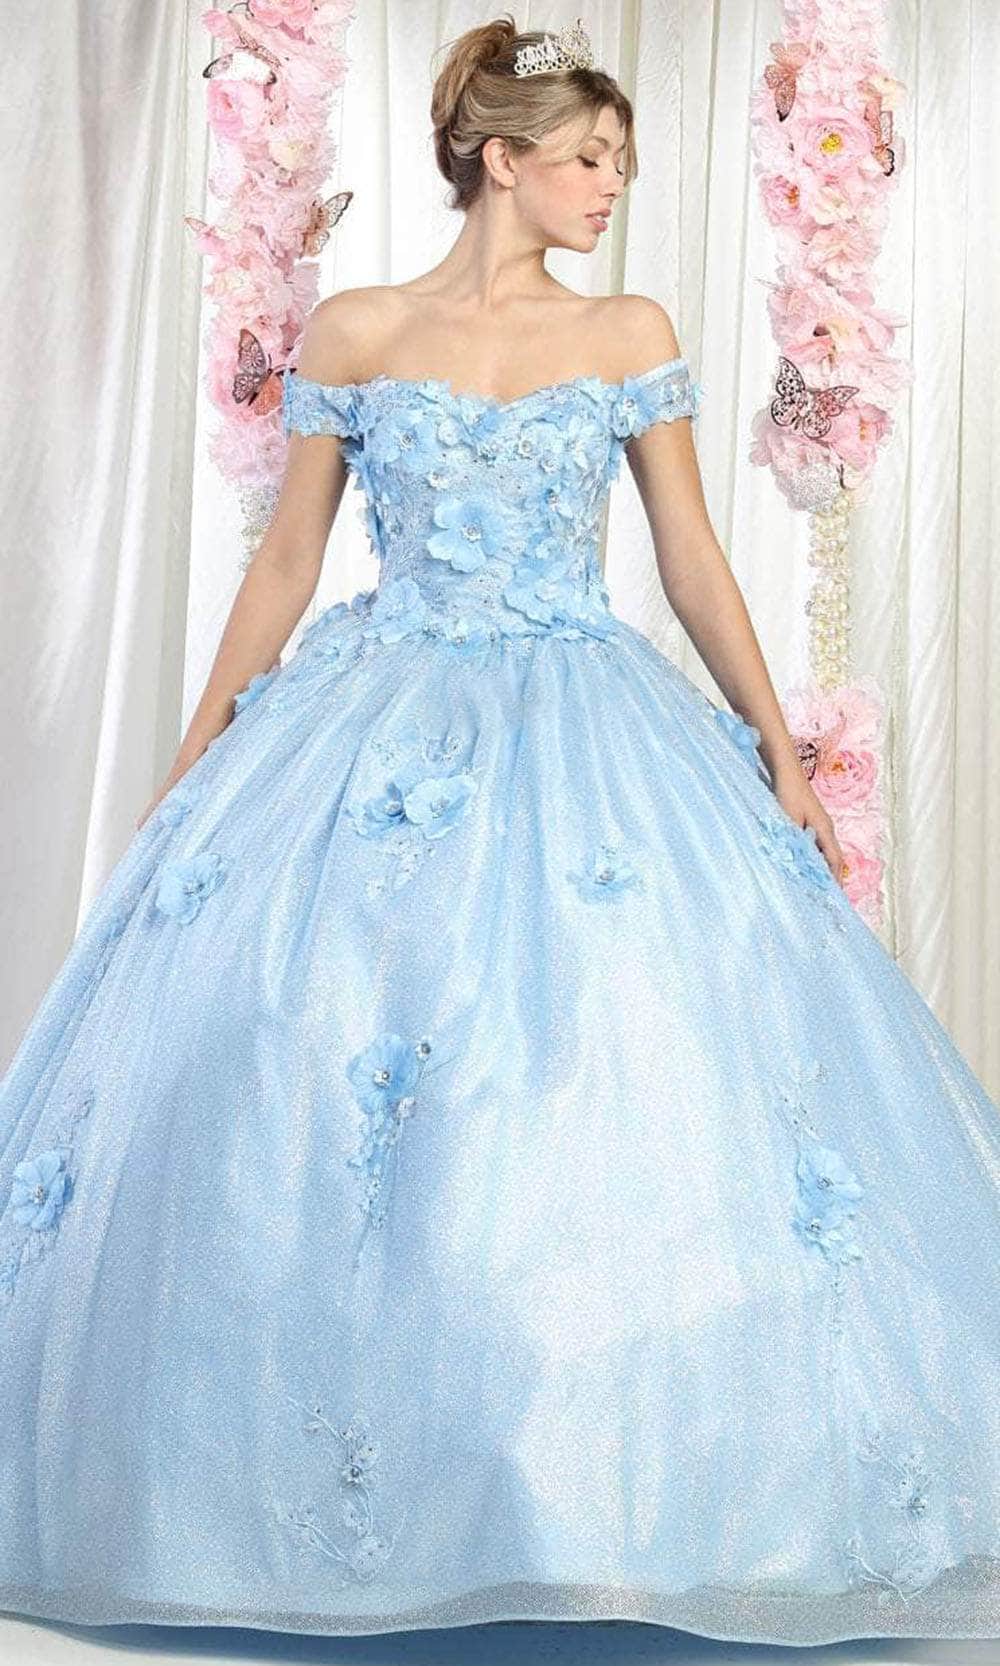 May Queen LK161 - Off Shoulder Floral Prom Ballgown
